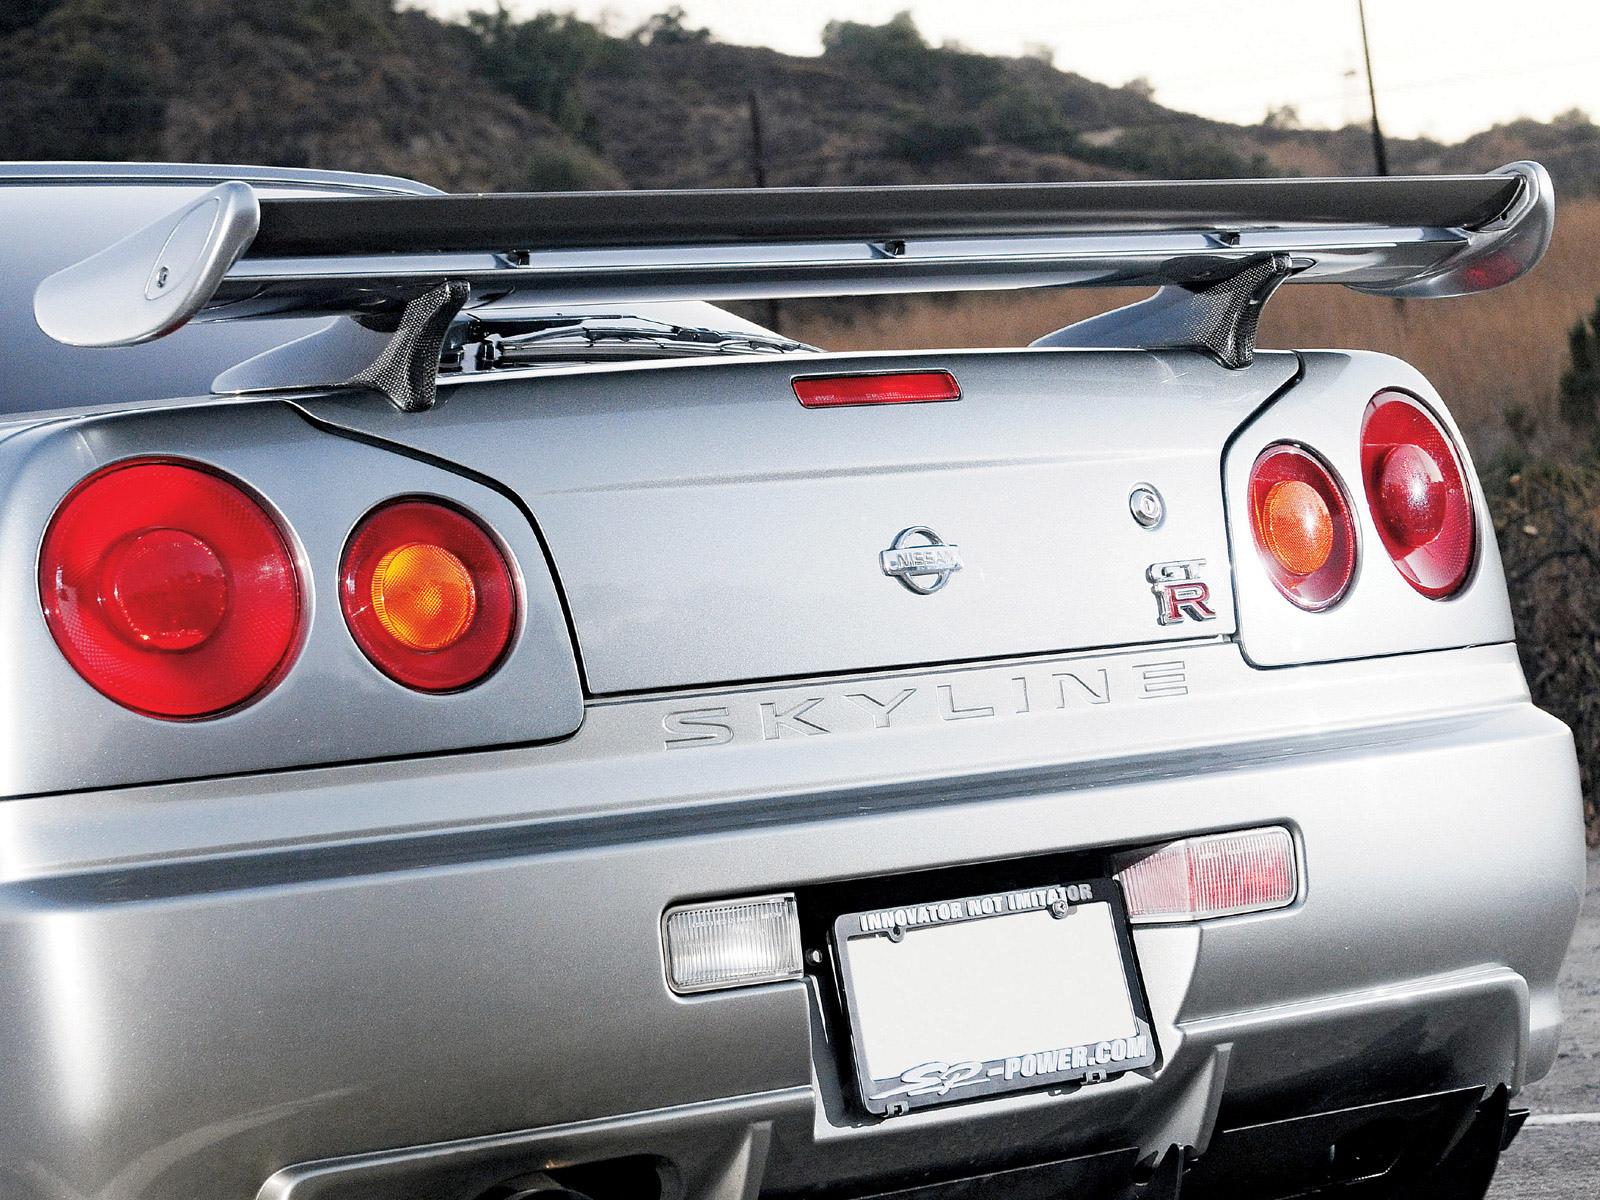 Nissan Skyline GT-R wallpapers HD quality